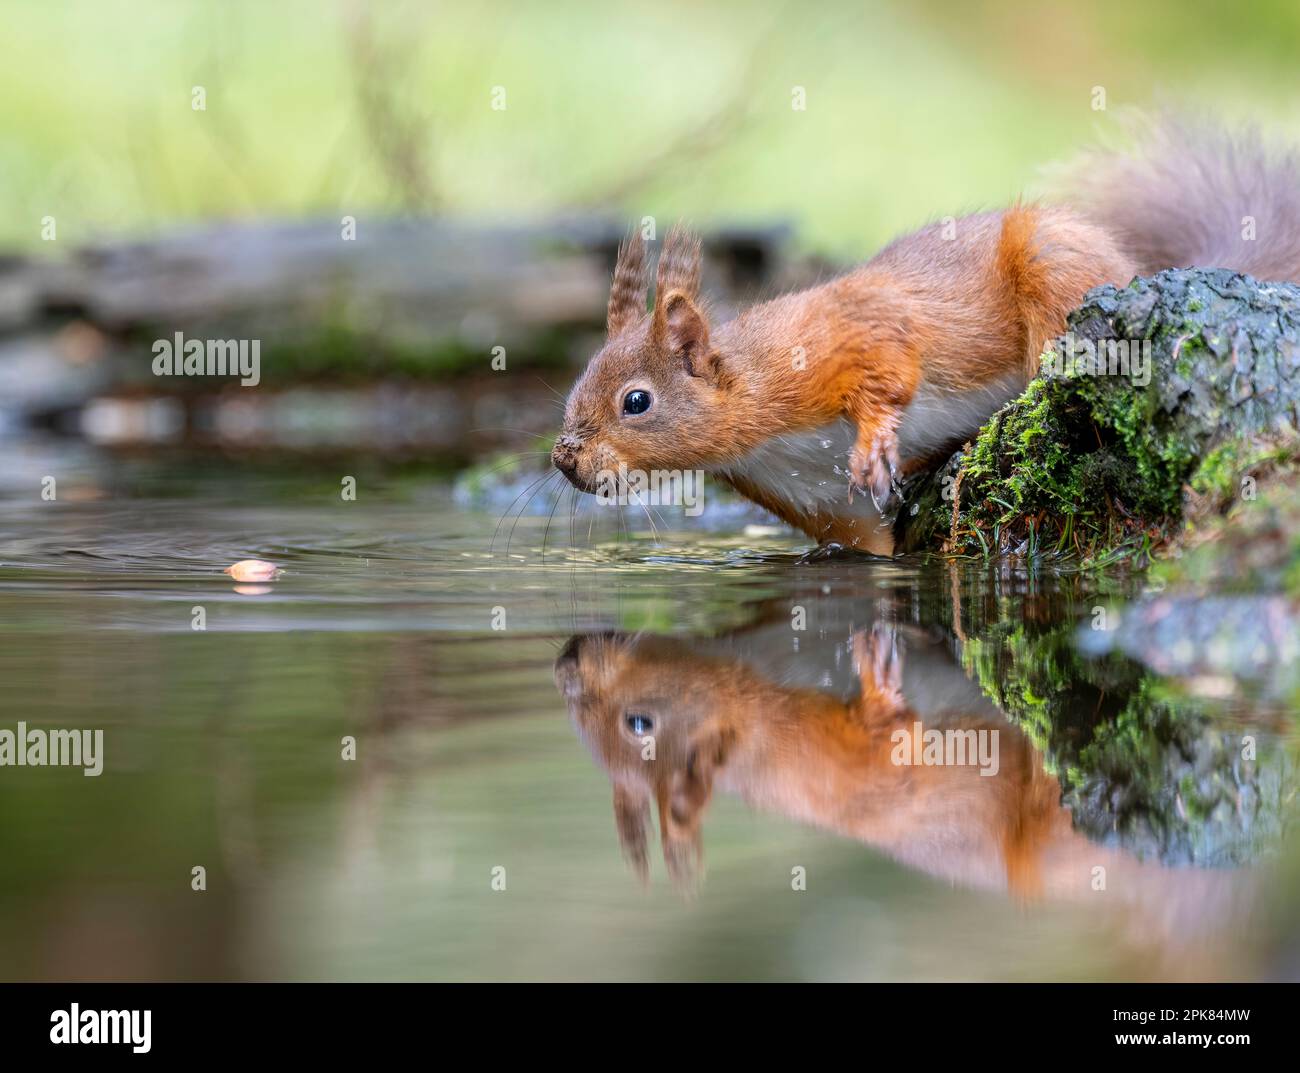 A British Red Squirrel, (Sciurus vulgaris), looking into a pool of water, (with reflection) Stock Photo